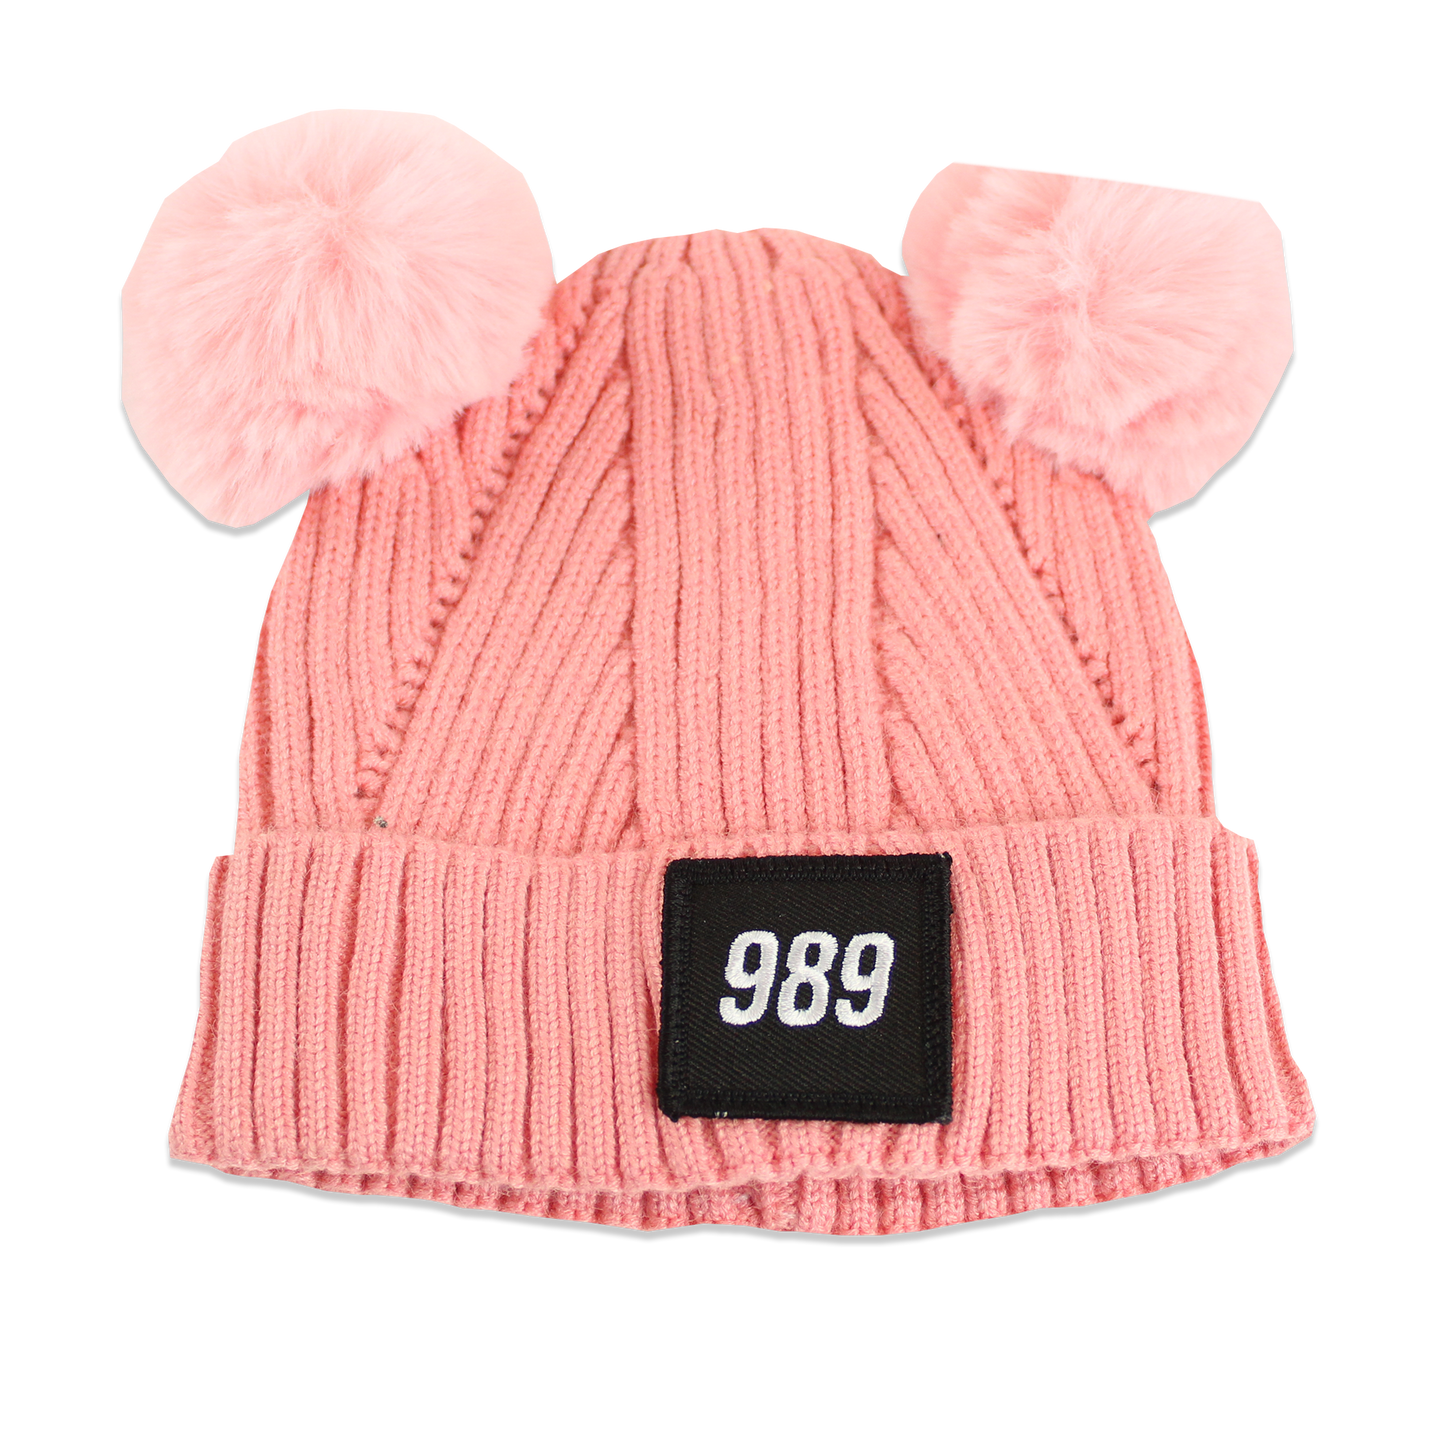 989 Infant Beanie - Pink